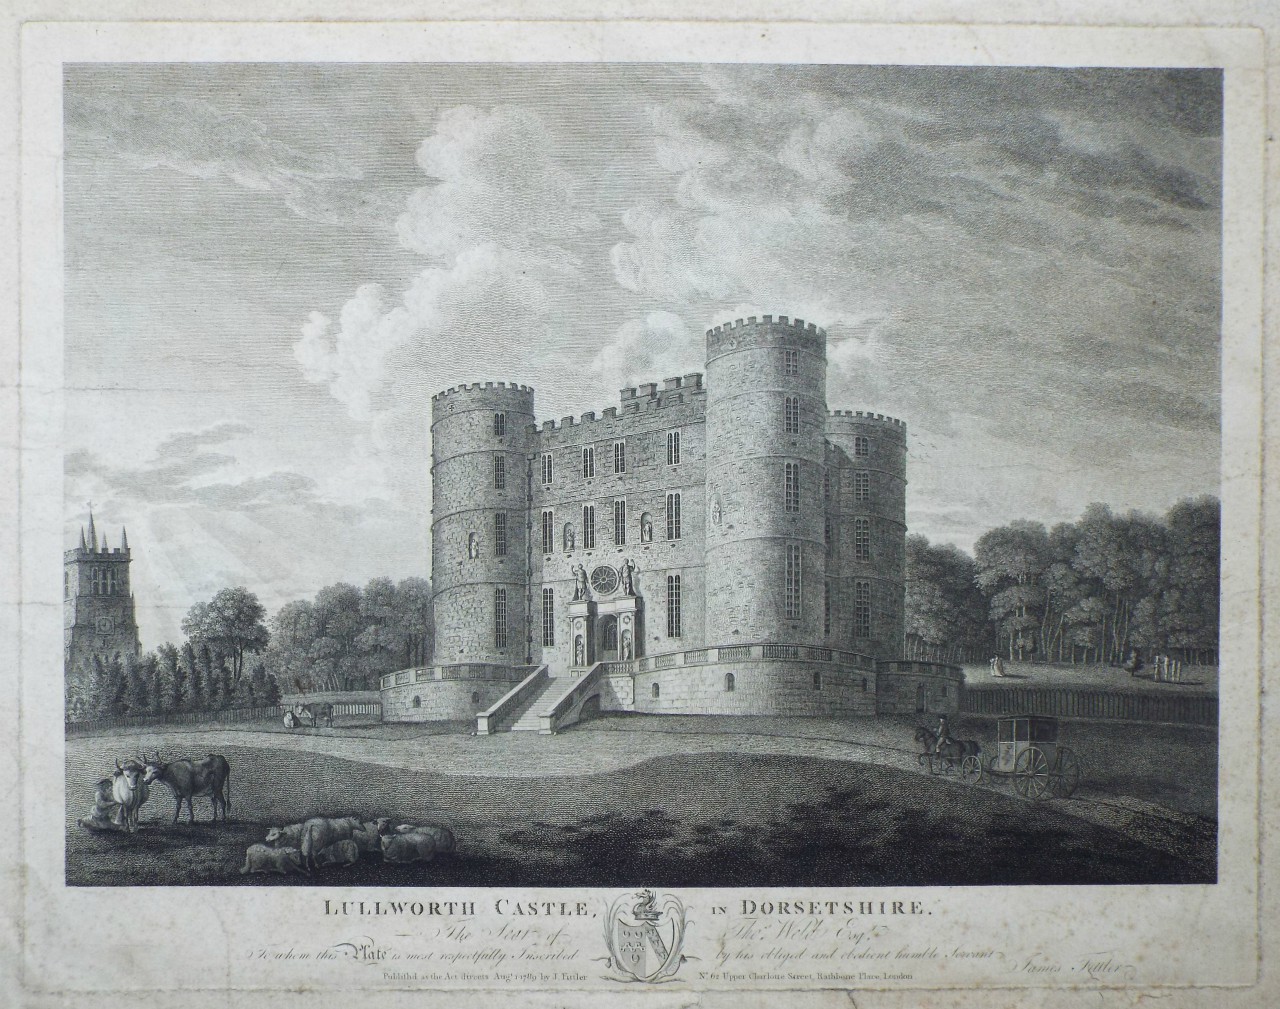 Print - Lullworth Castle, in Dorsetshire. The Seat of Thos. Weld Esqr. - Fittler